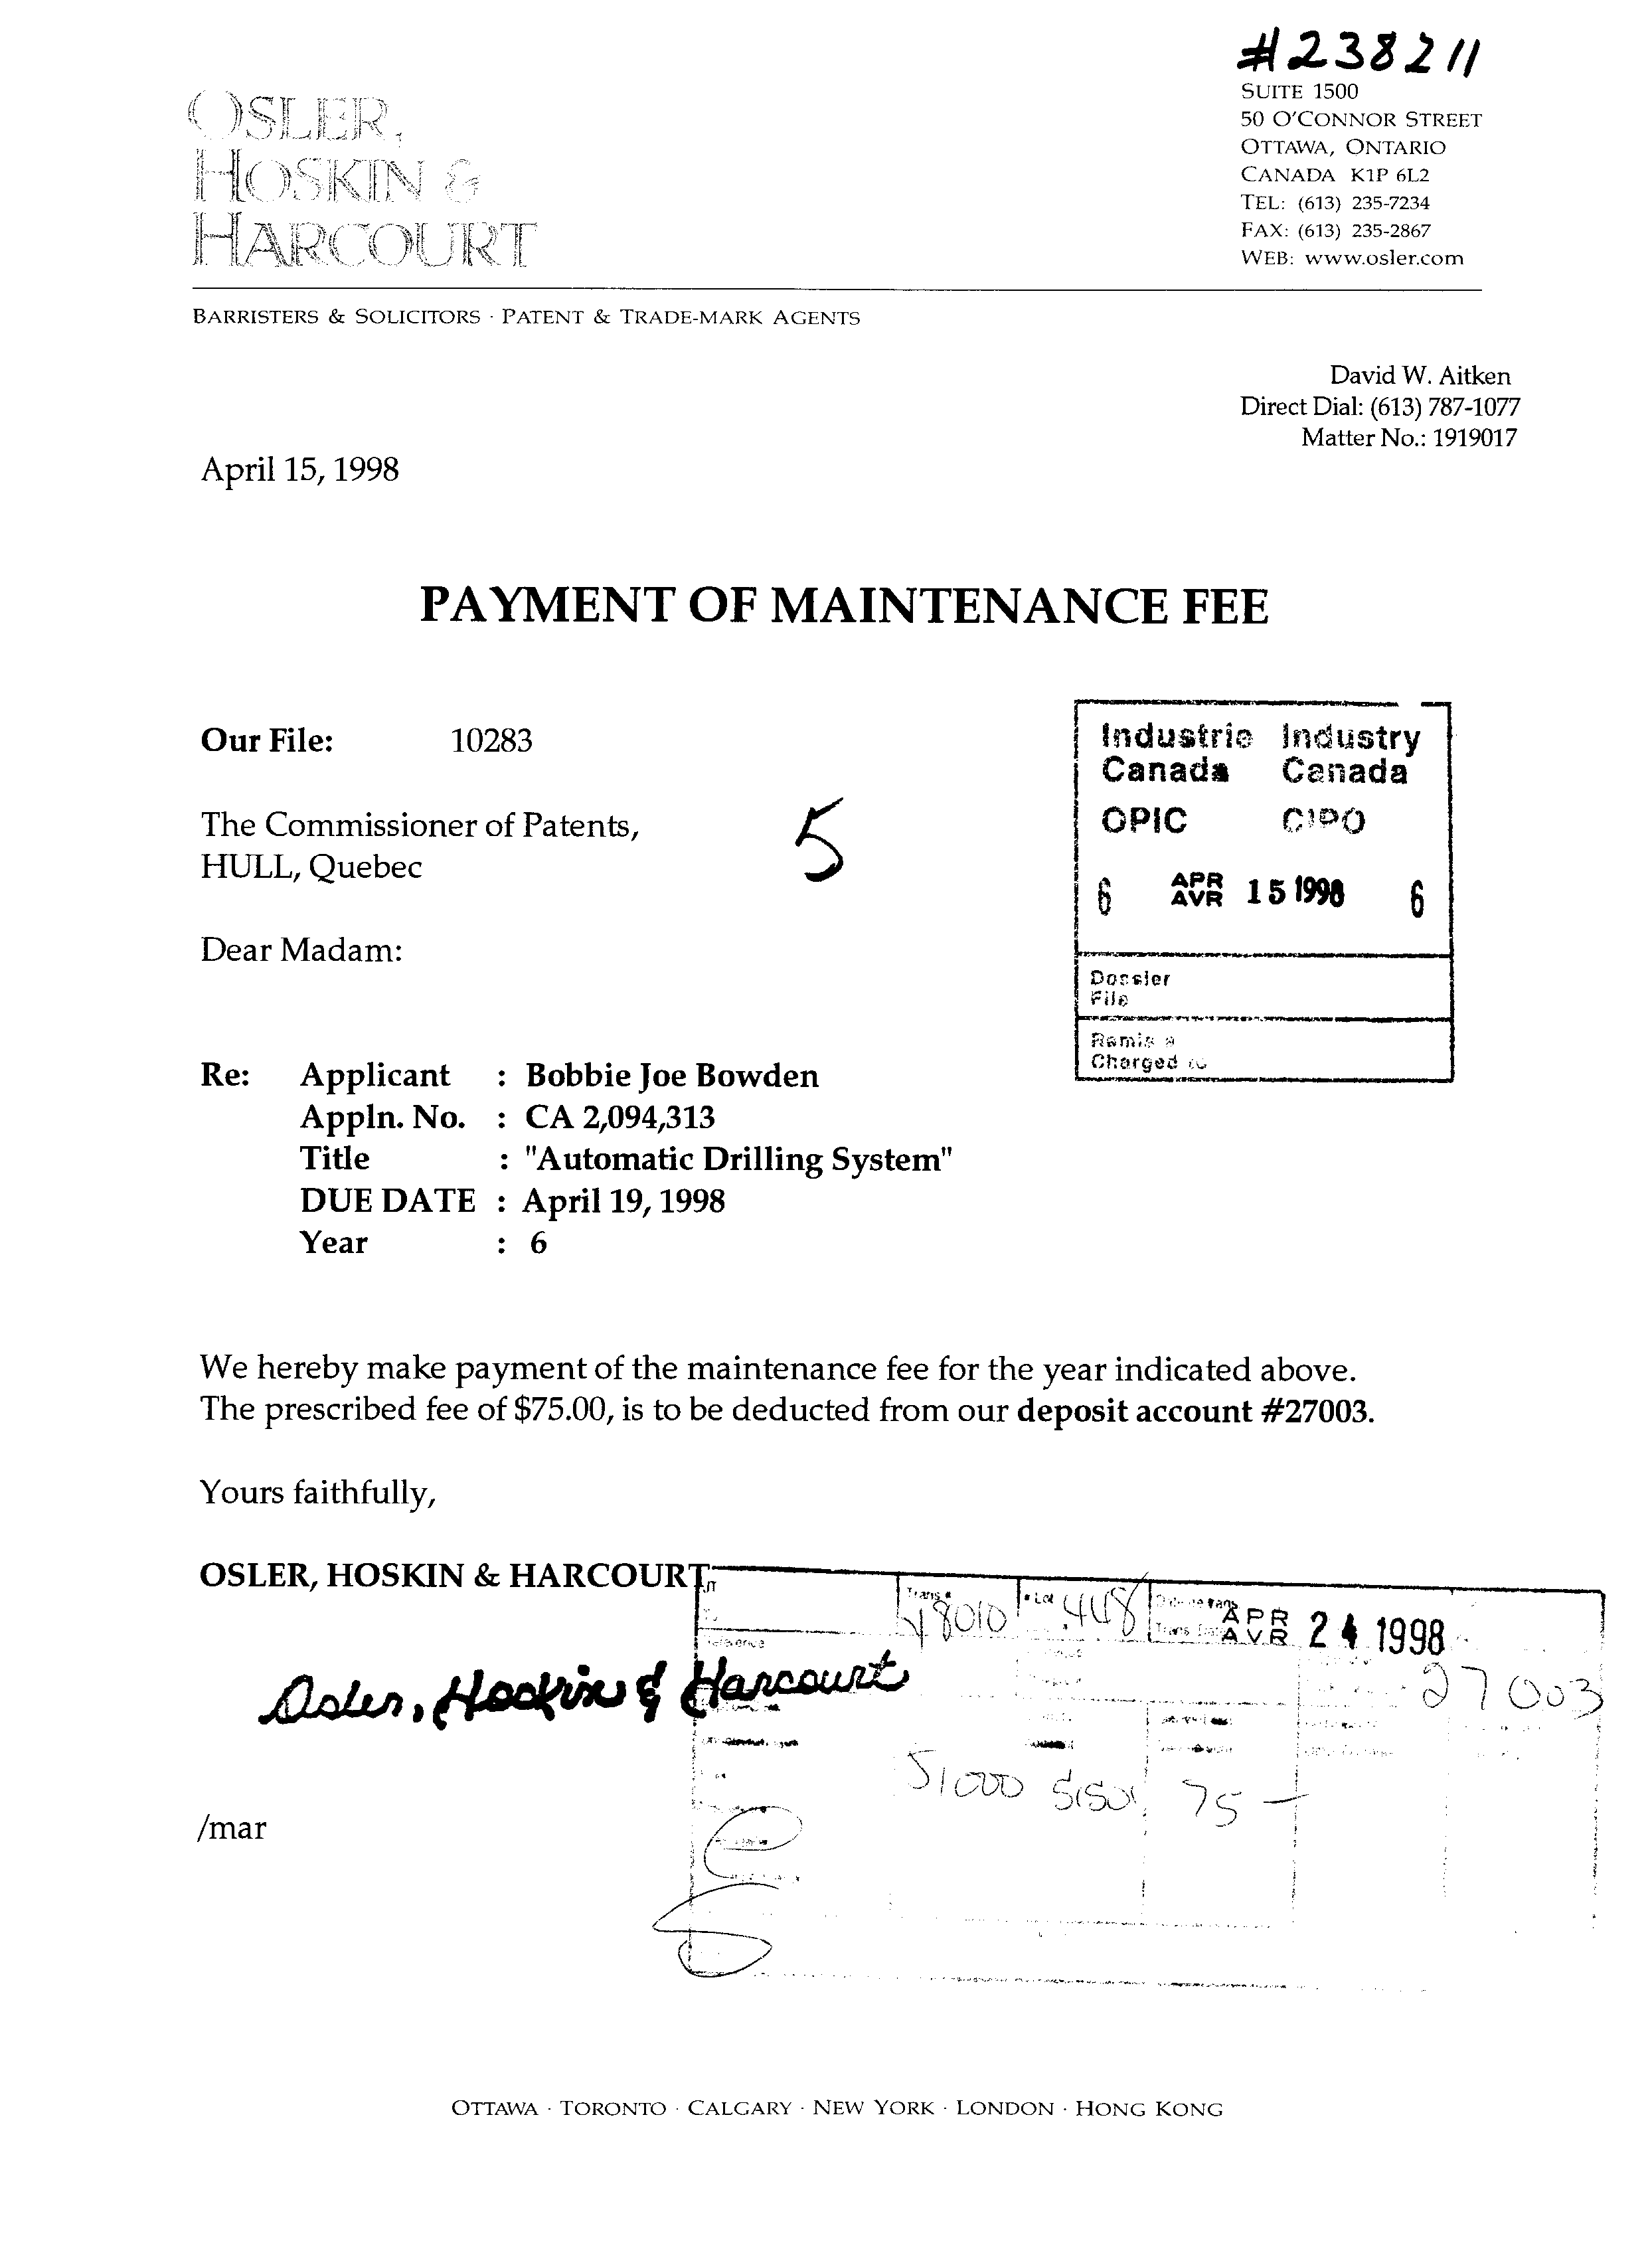 Canadian Patent Document 2094313. Fees 19980415. Image 1 of 1